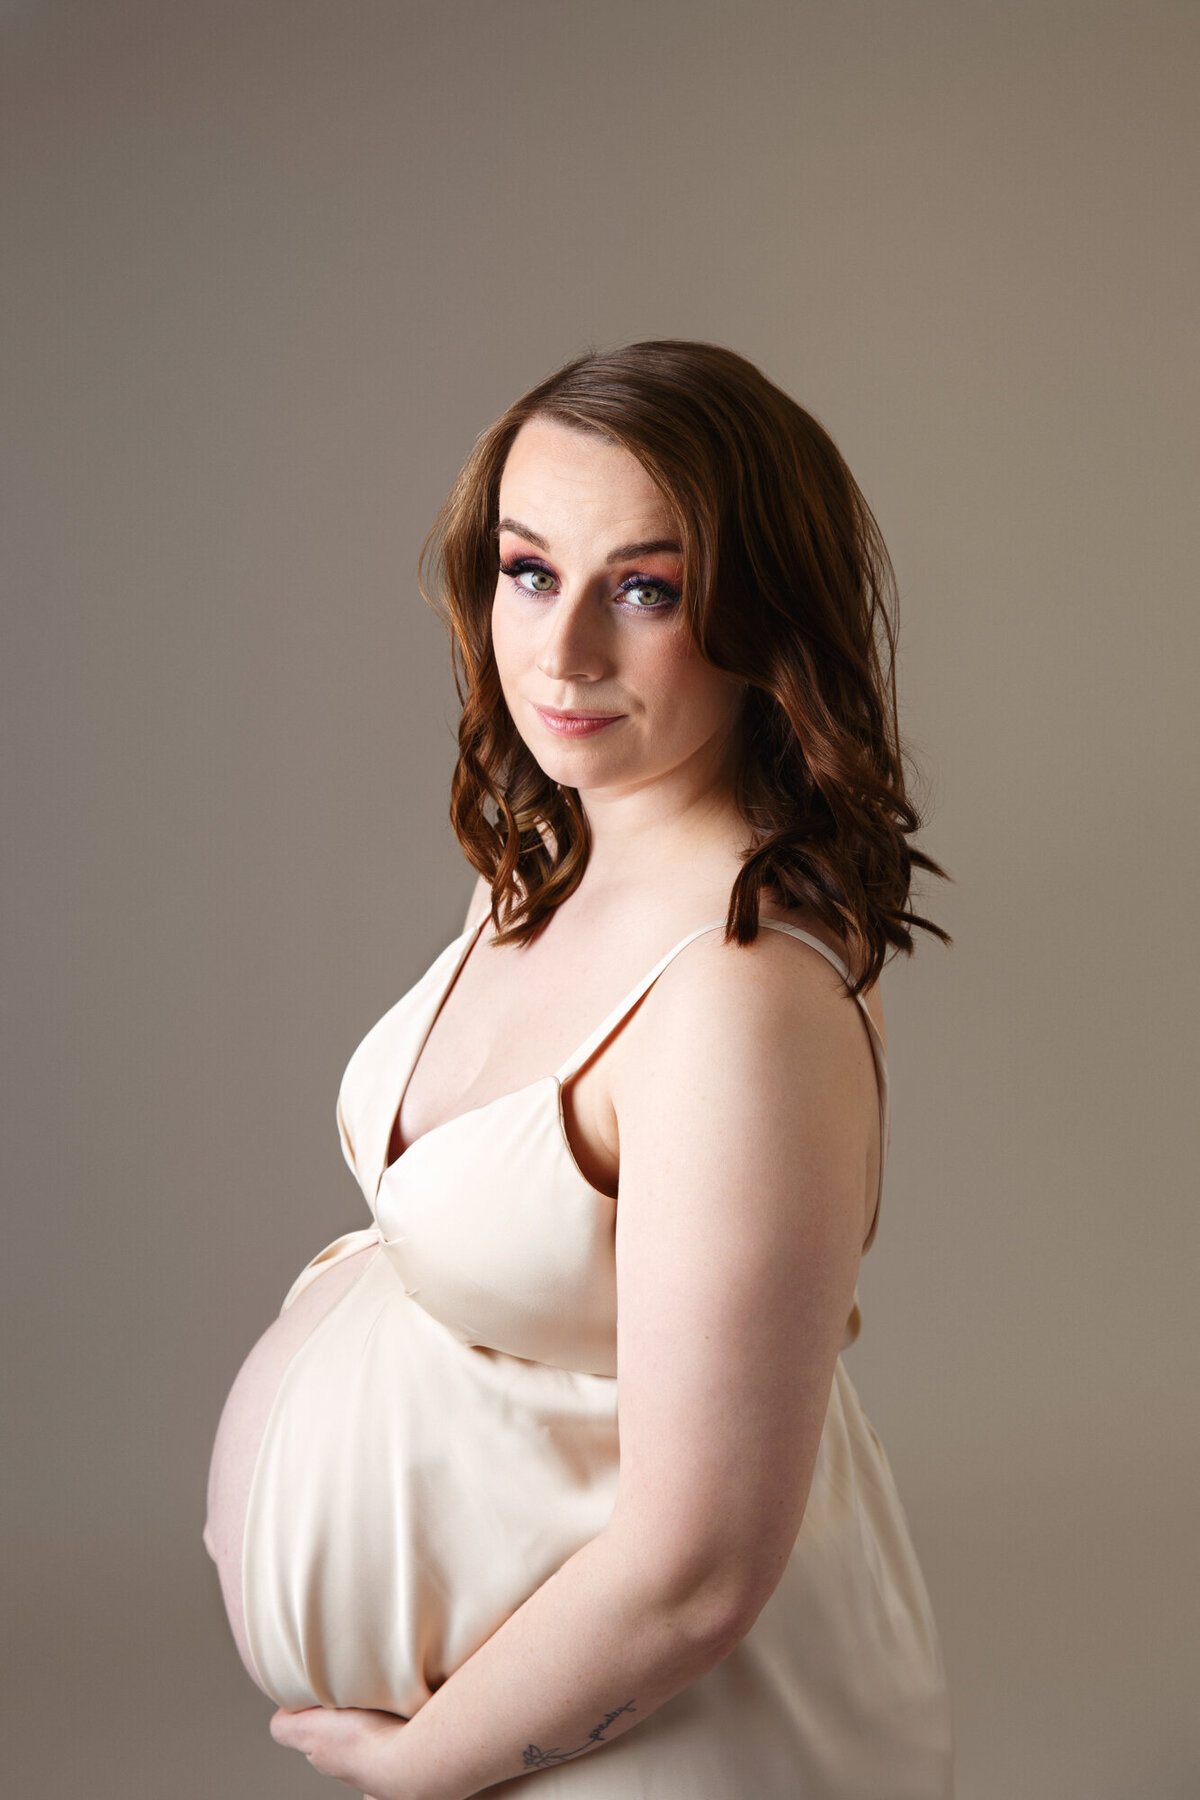 Close up portrait of a  pregnant woman wearing a gold gown photographed on a brown background